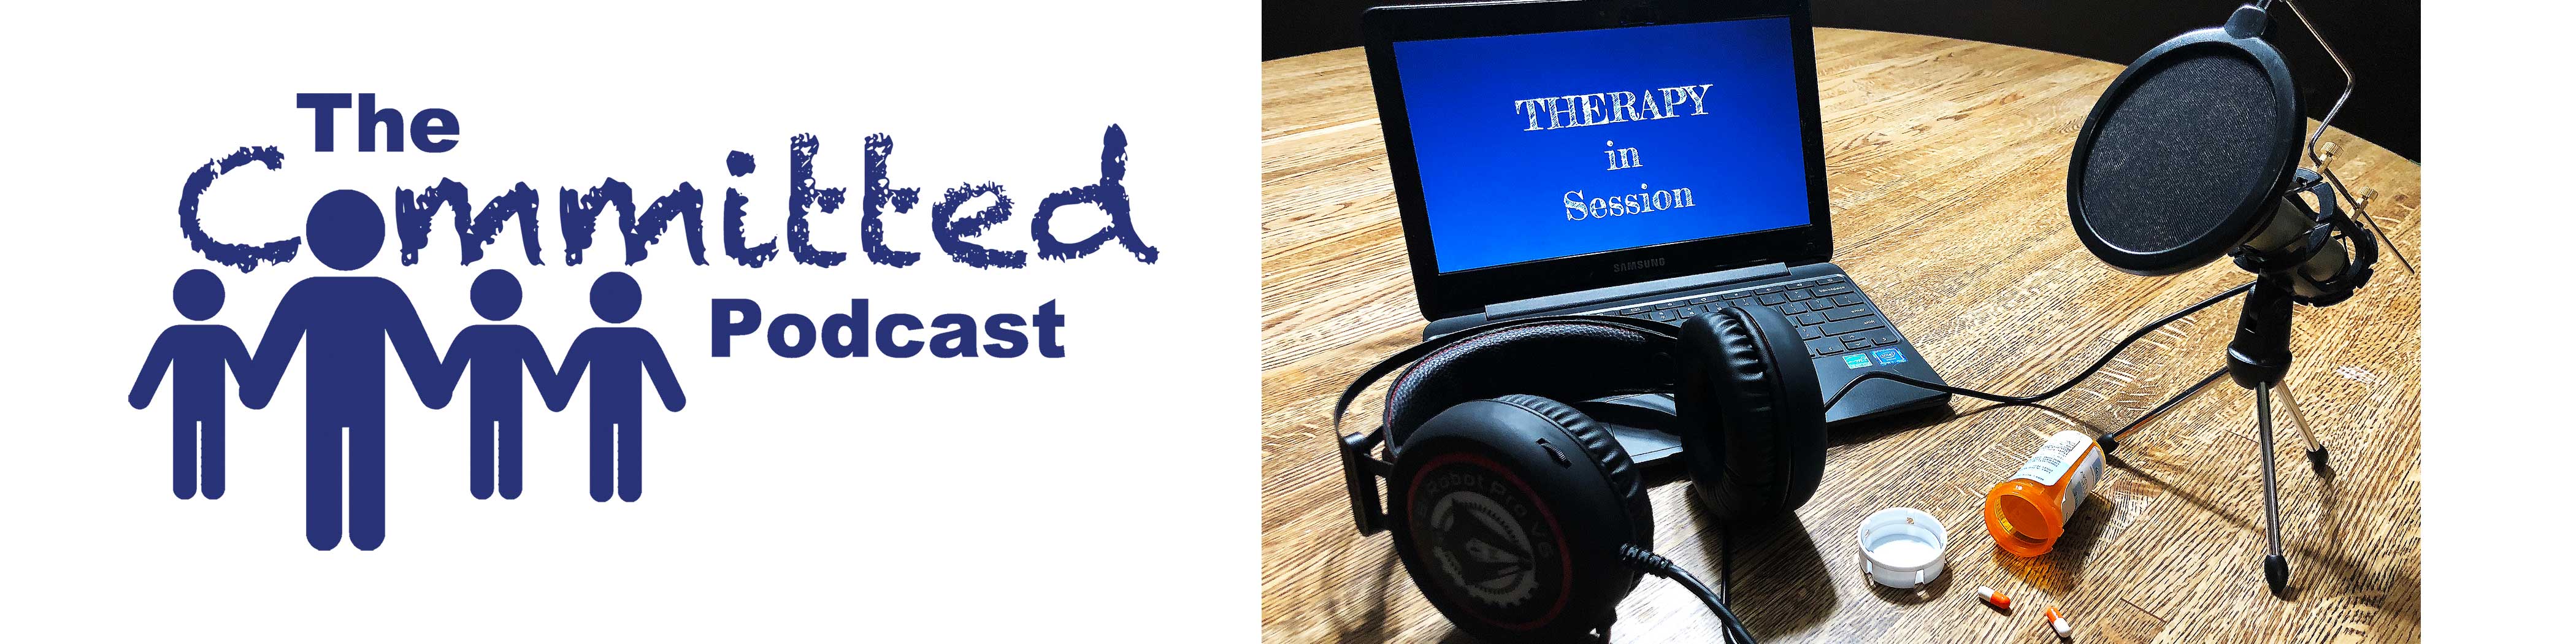 The Committed Podcast logo next to picture of headphones, microphone, laptop with screen that says 